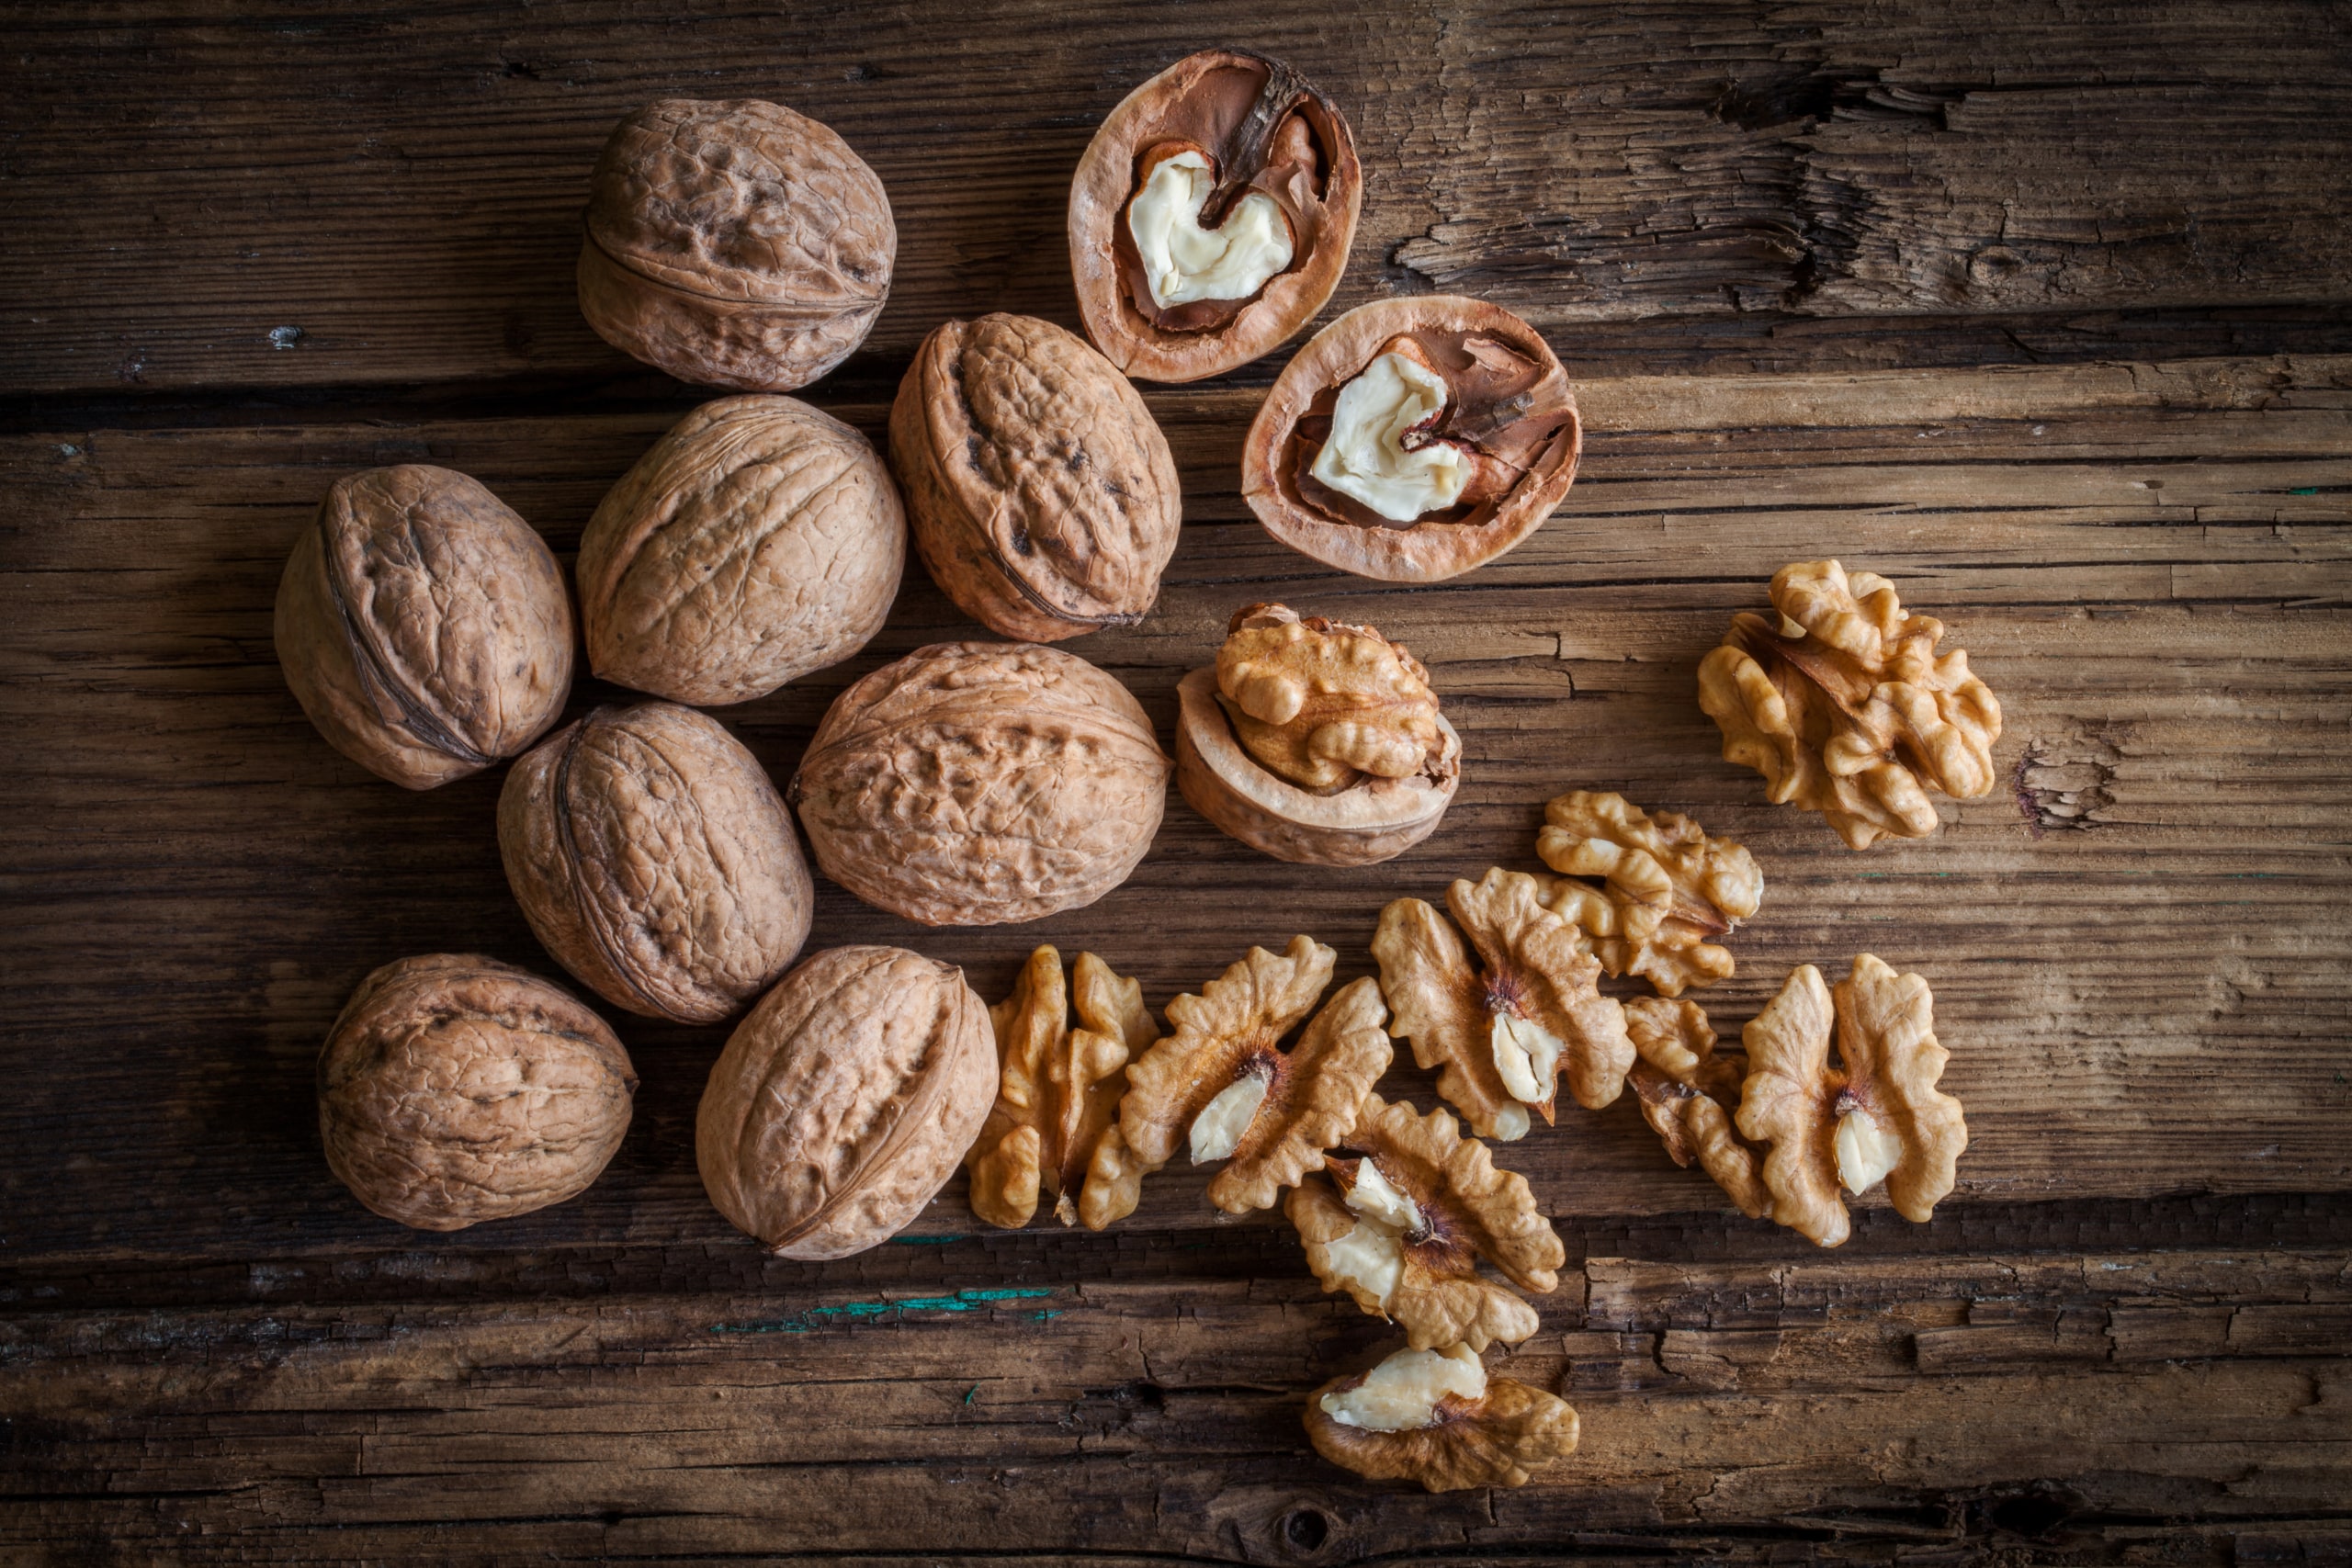 Outbreak Alert: E coli O157 Ravages States, Traced to Gibson Farms Organic Walnuts